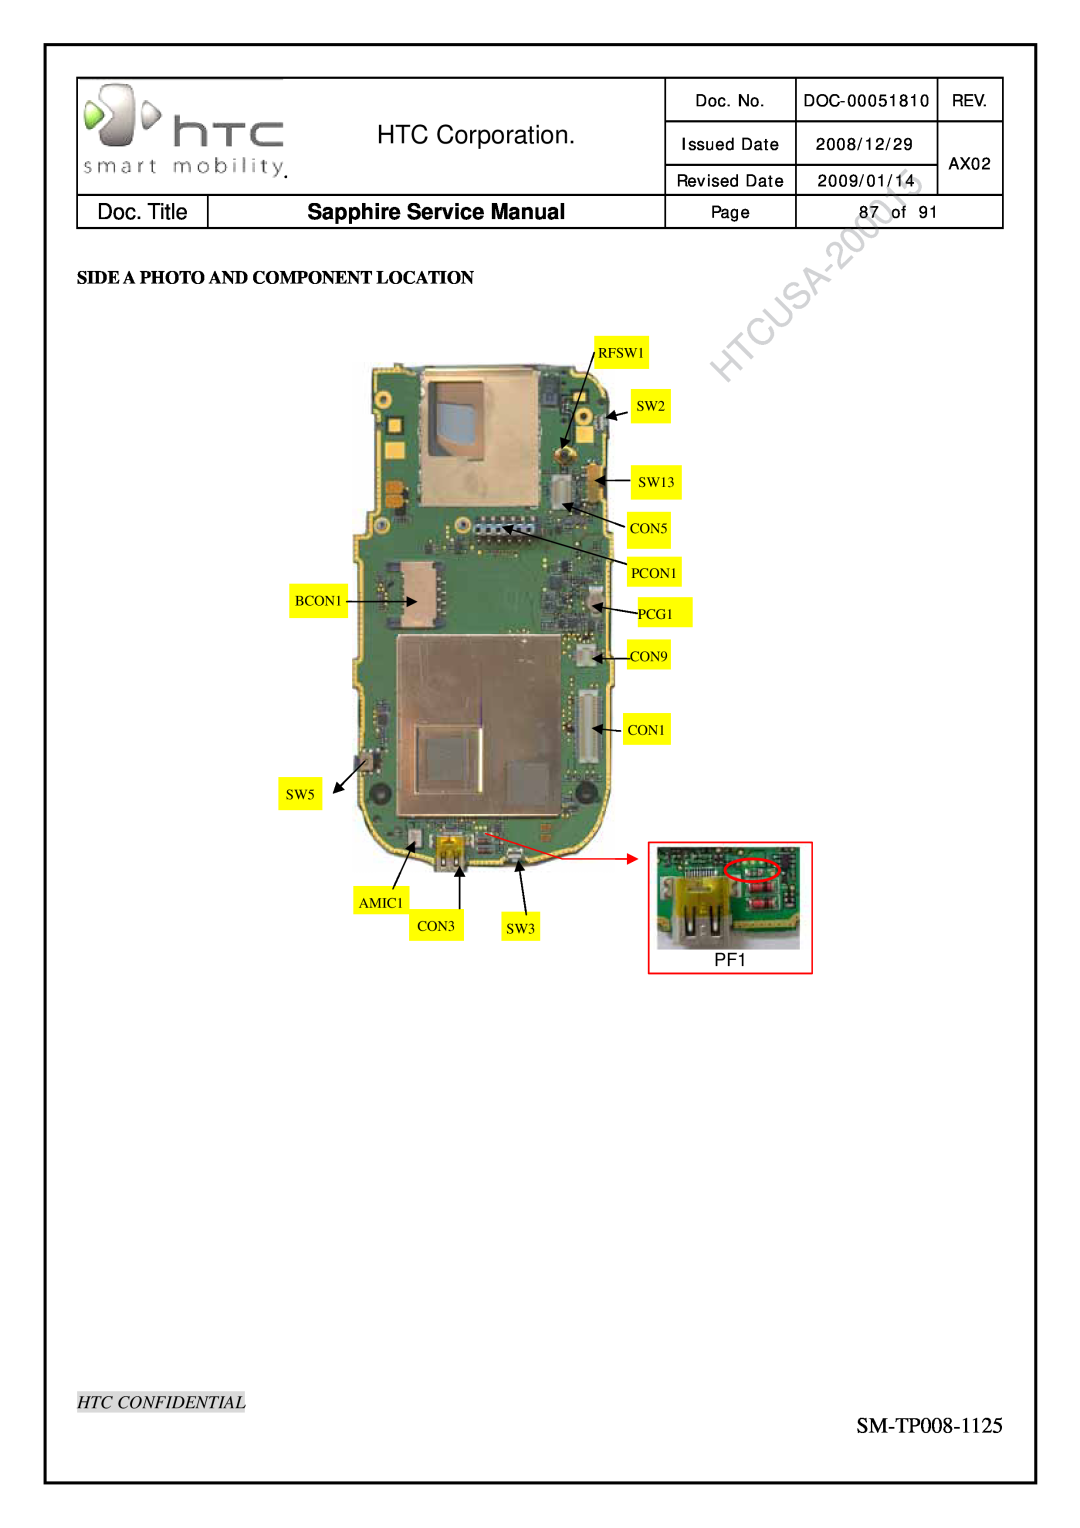 HTC SM-TP008-1125 HTC Corporation, Sapphire Service Manual, Side A Photo And Component Location, Htc Confidential, Doc. No 